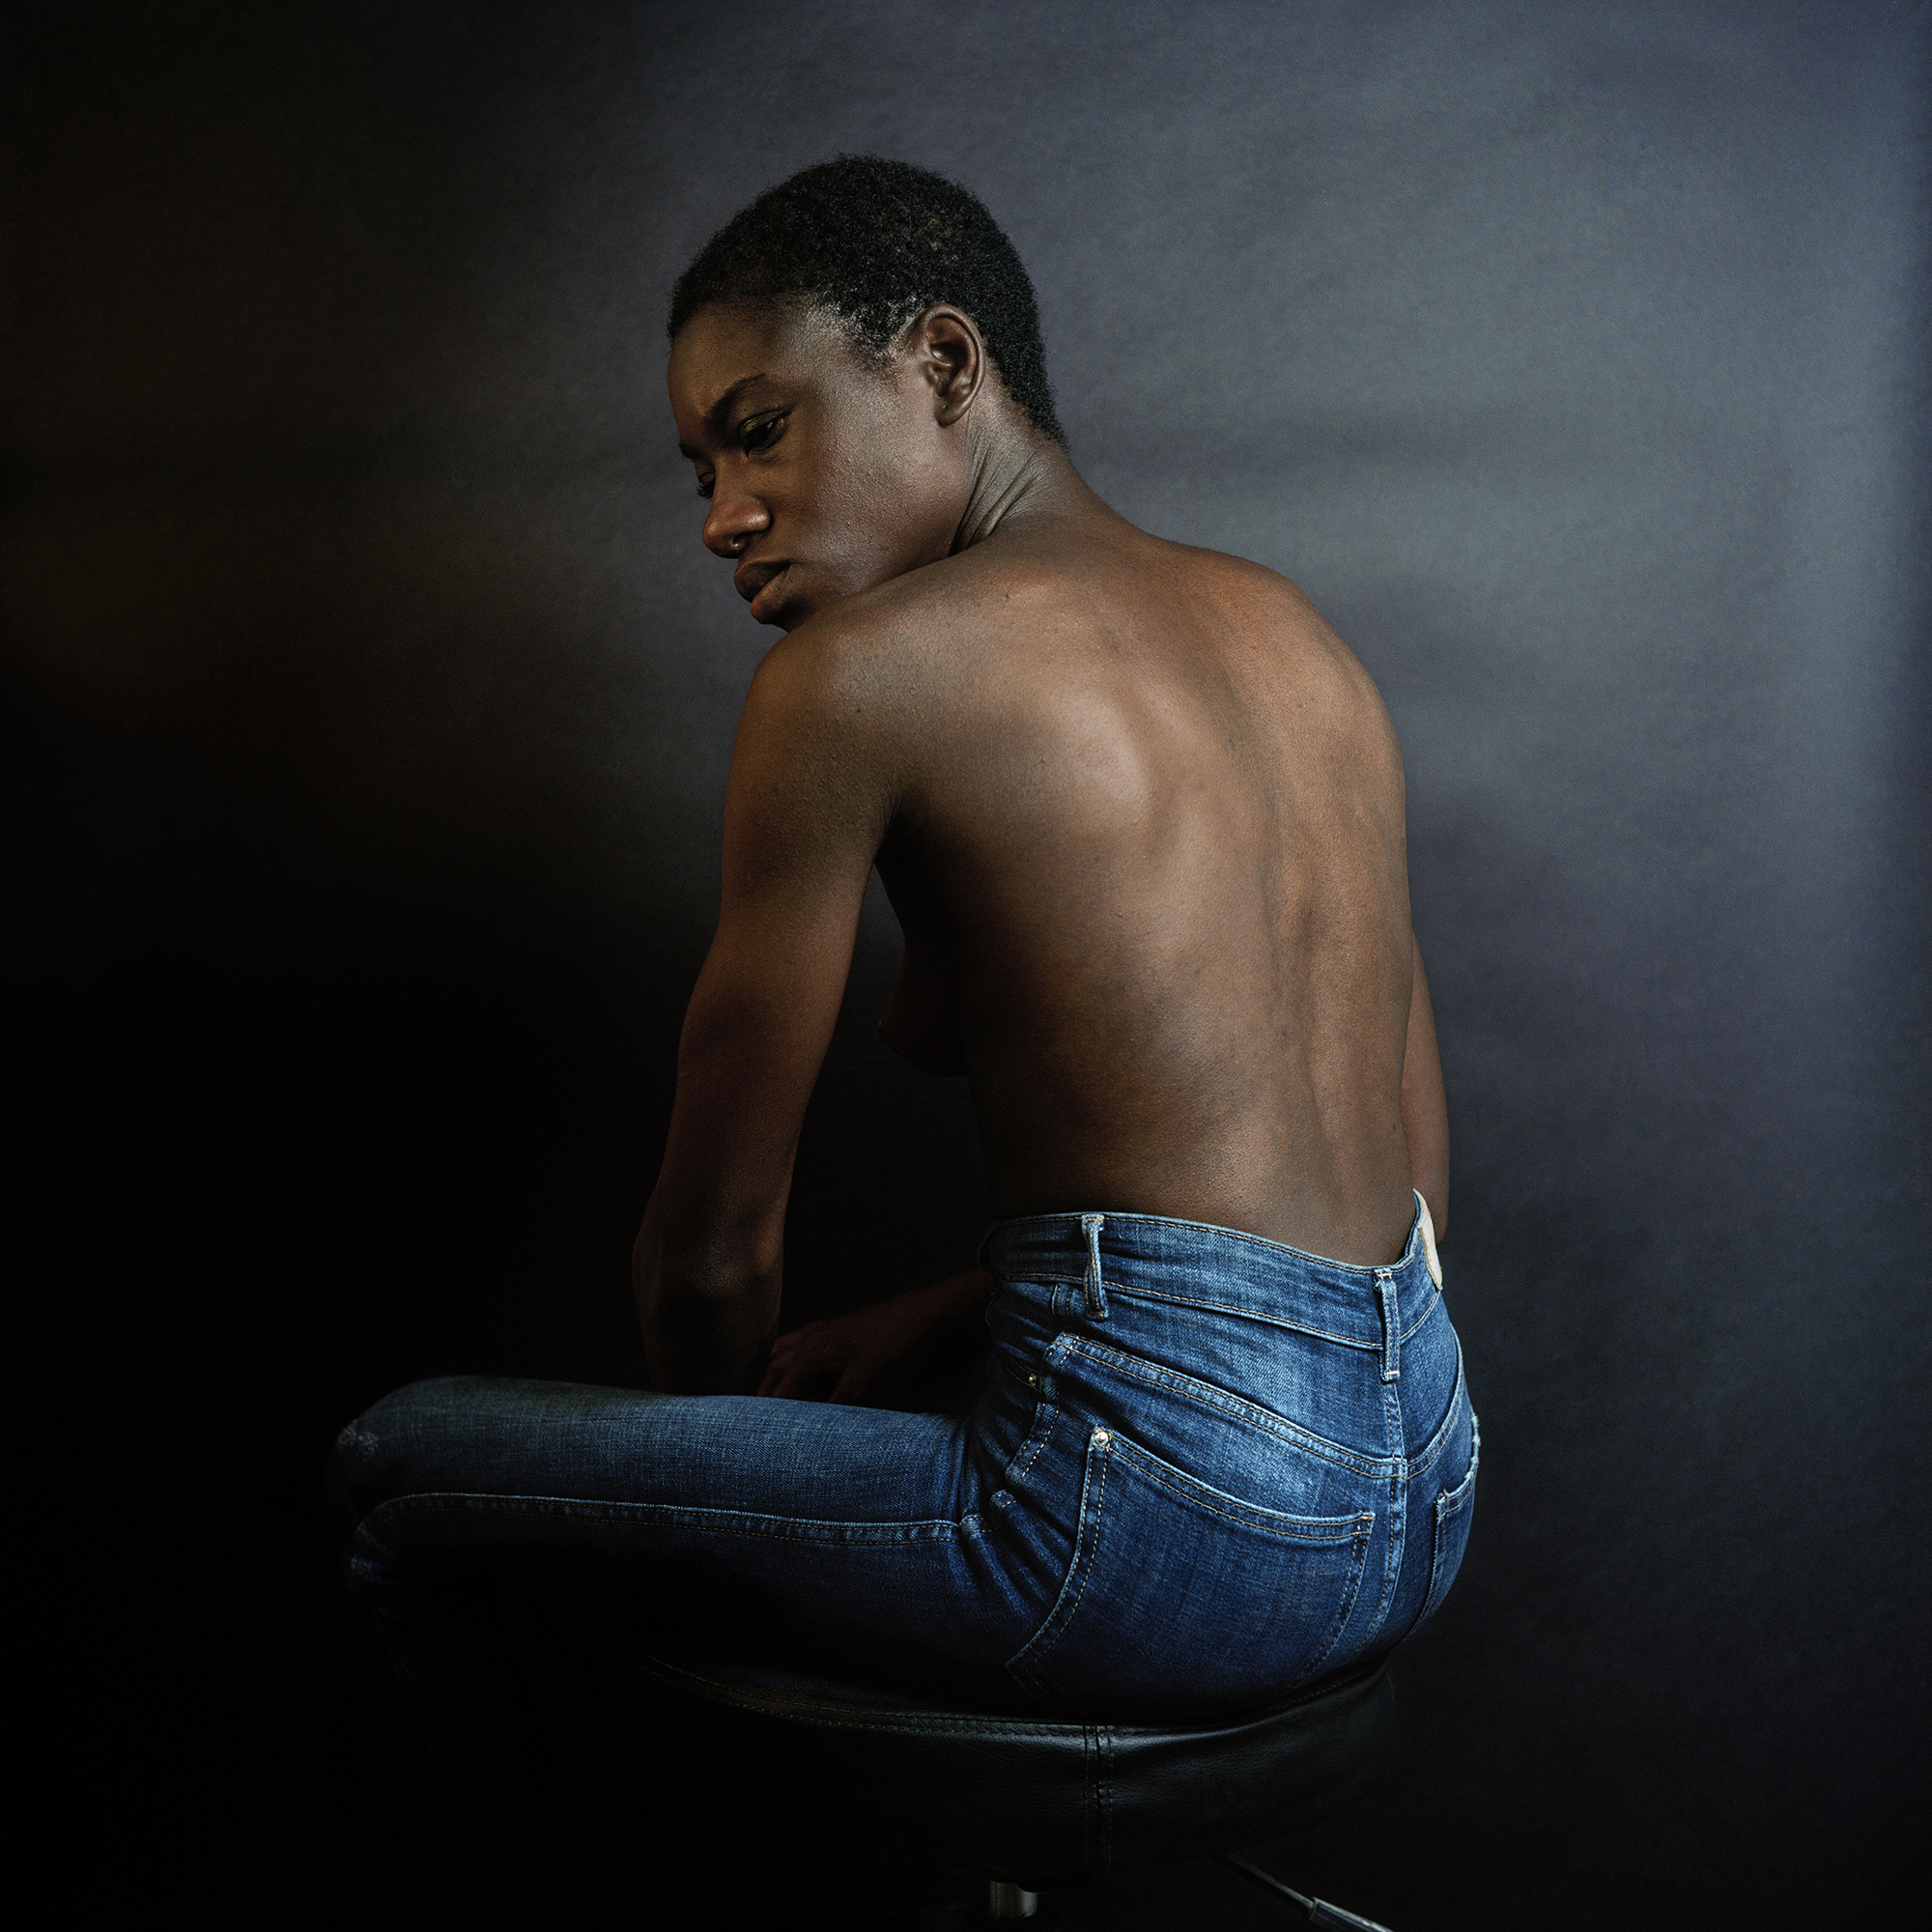 Sitting Like Gordon With Bare-Back ,  Indigo and Shutter Release in Hand, 2018